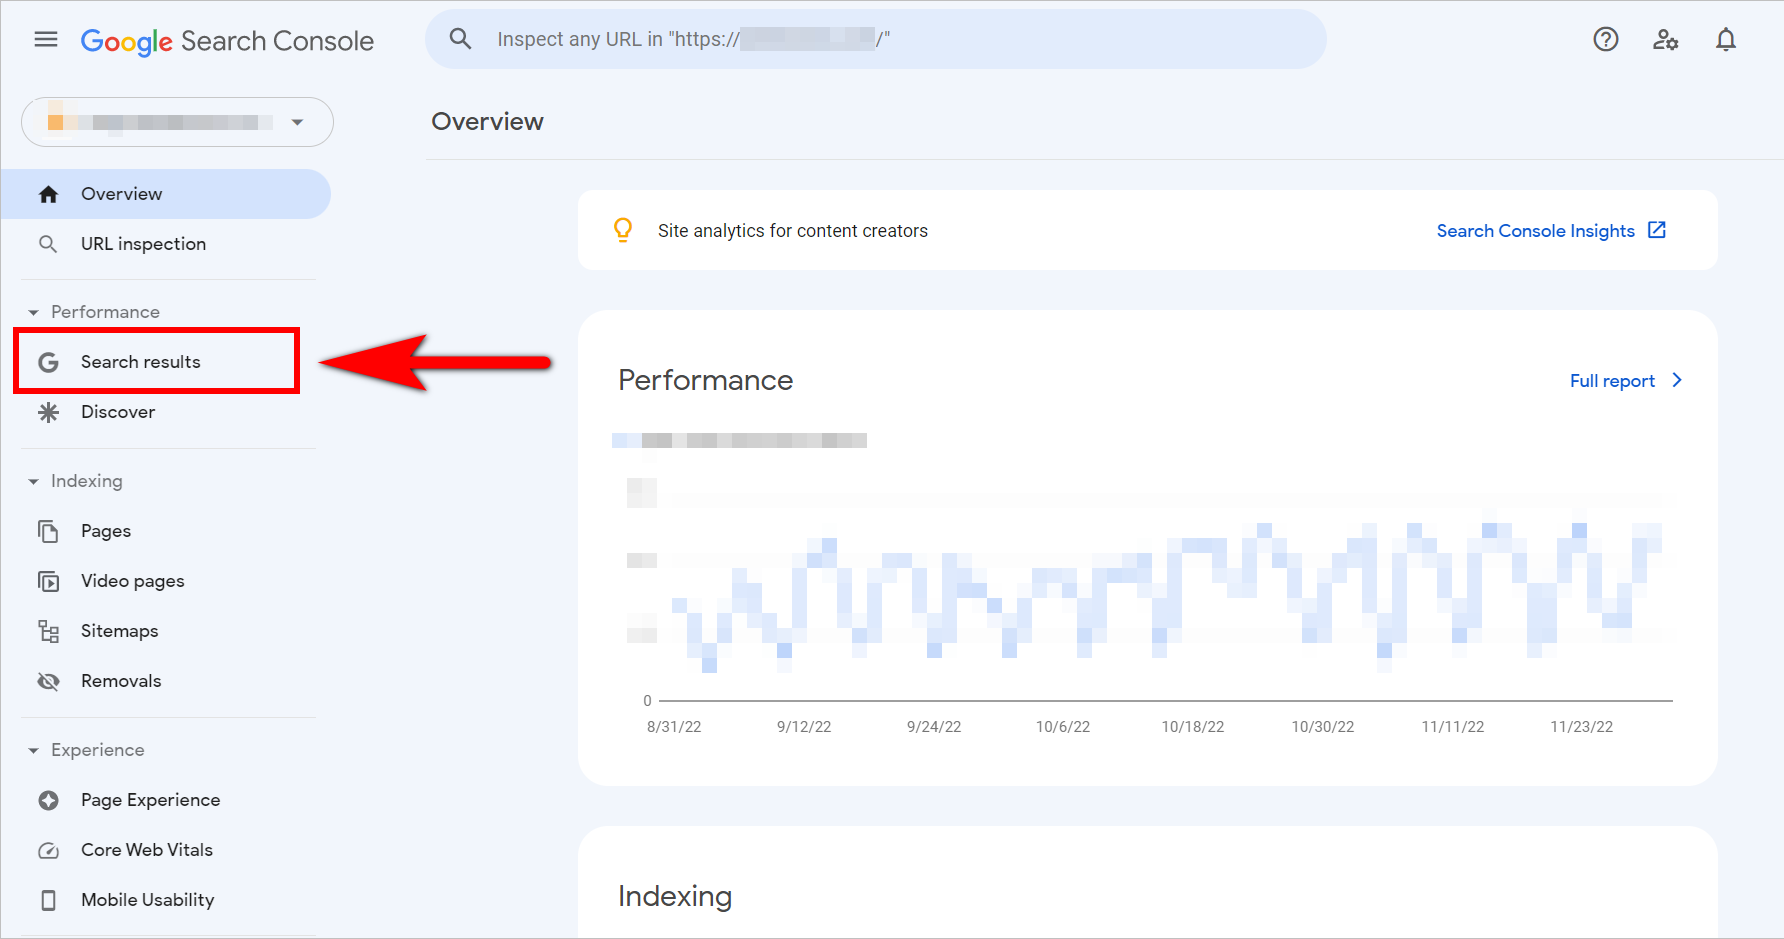 Google Search Console Basics – Search results link in the left panel of GSC is boxed for visual emphasis